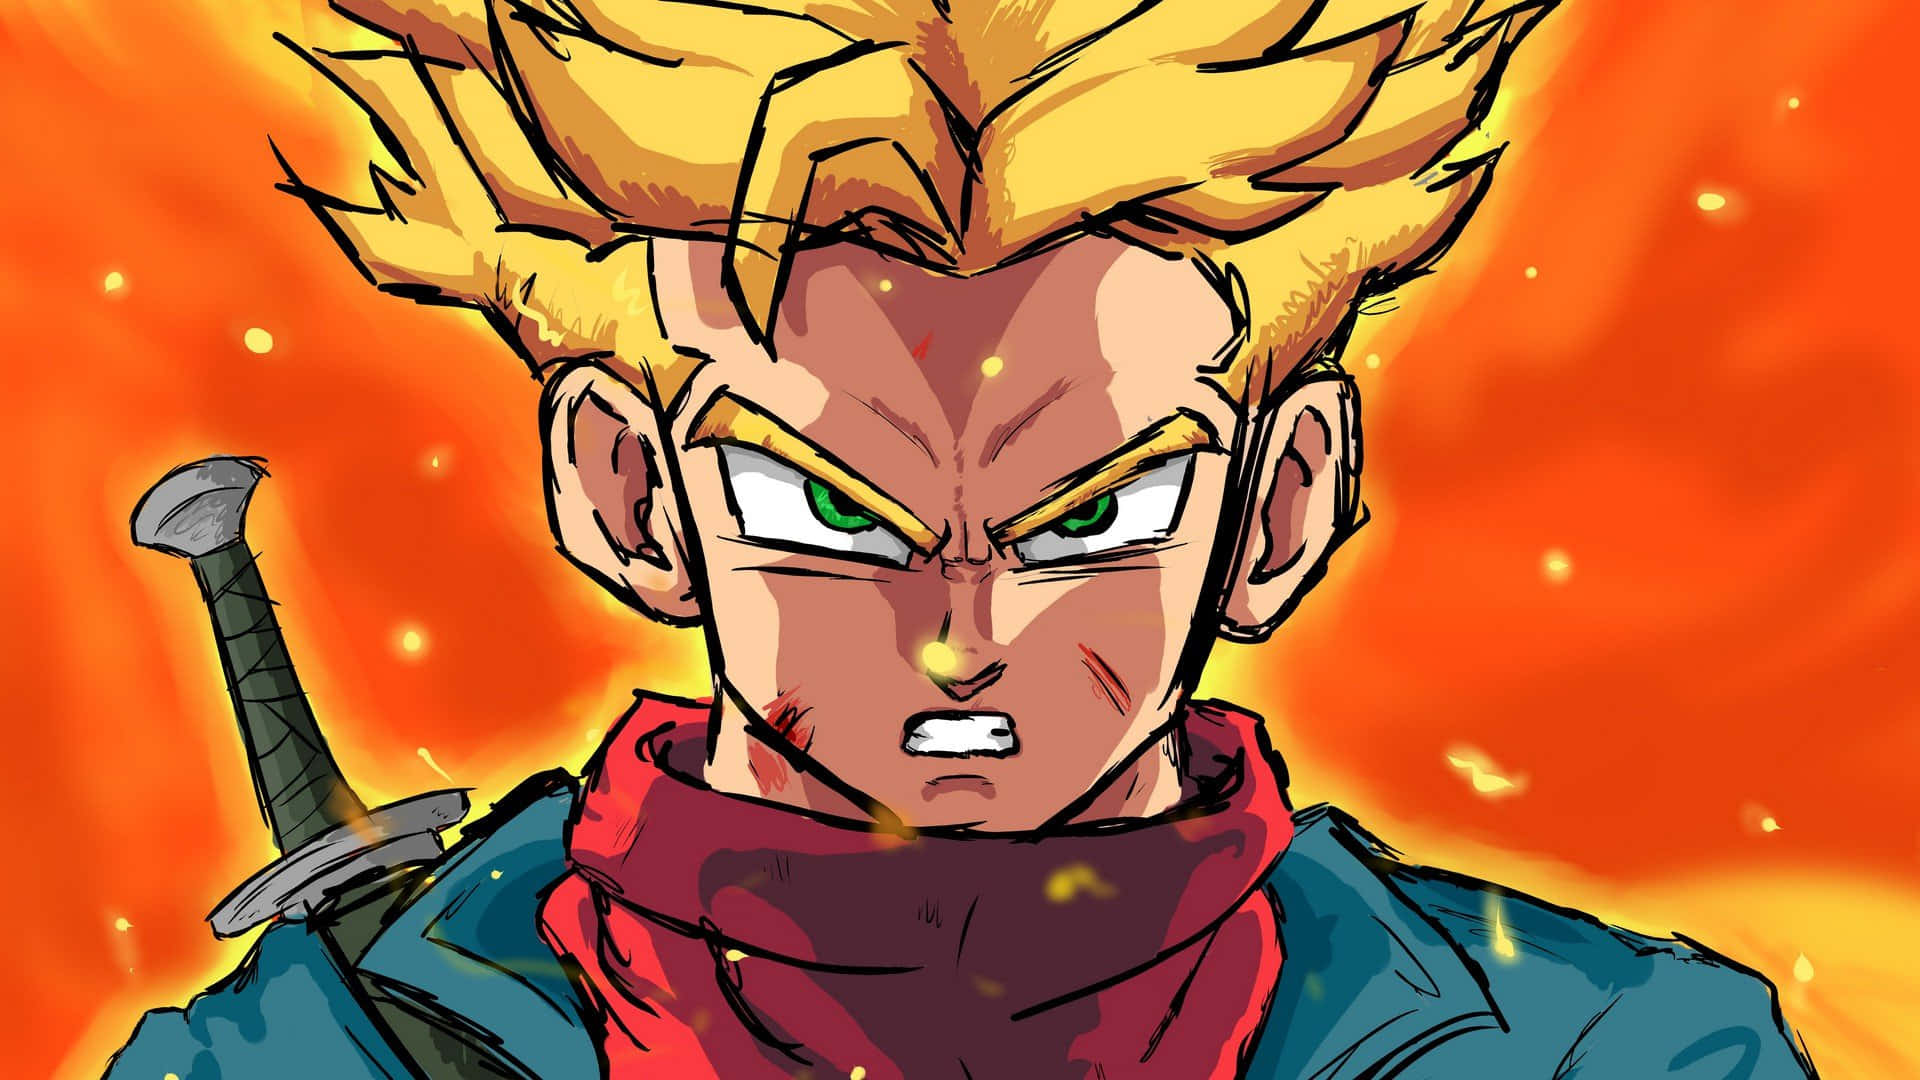 Trunks Irate Face Background